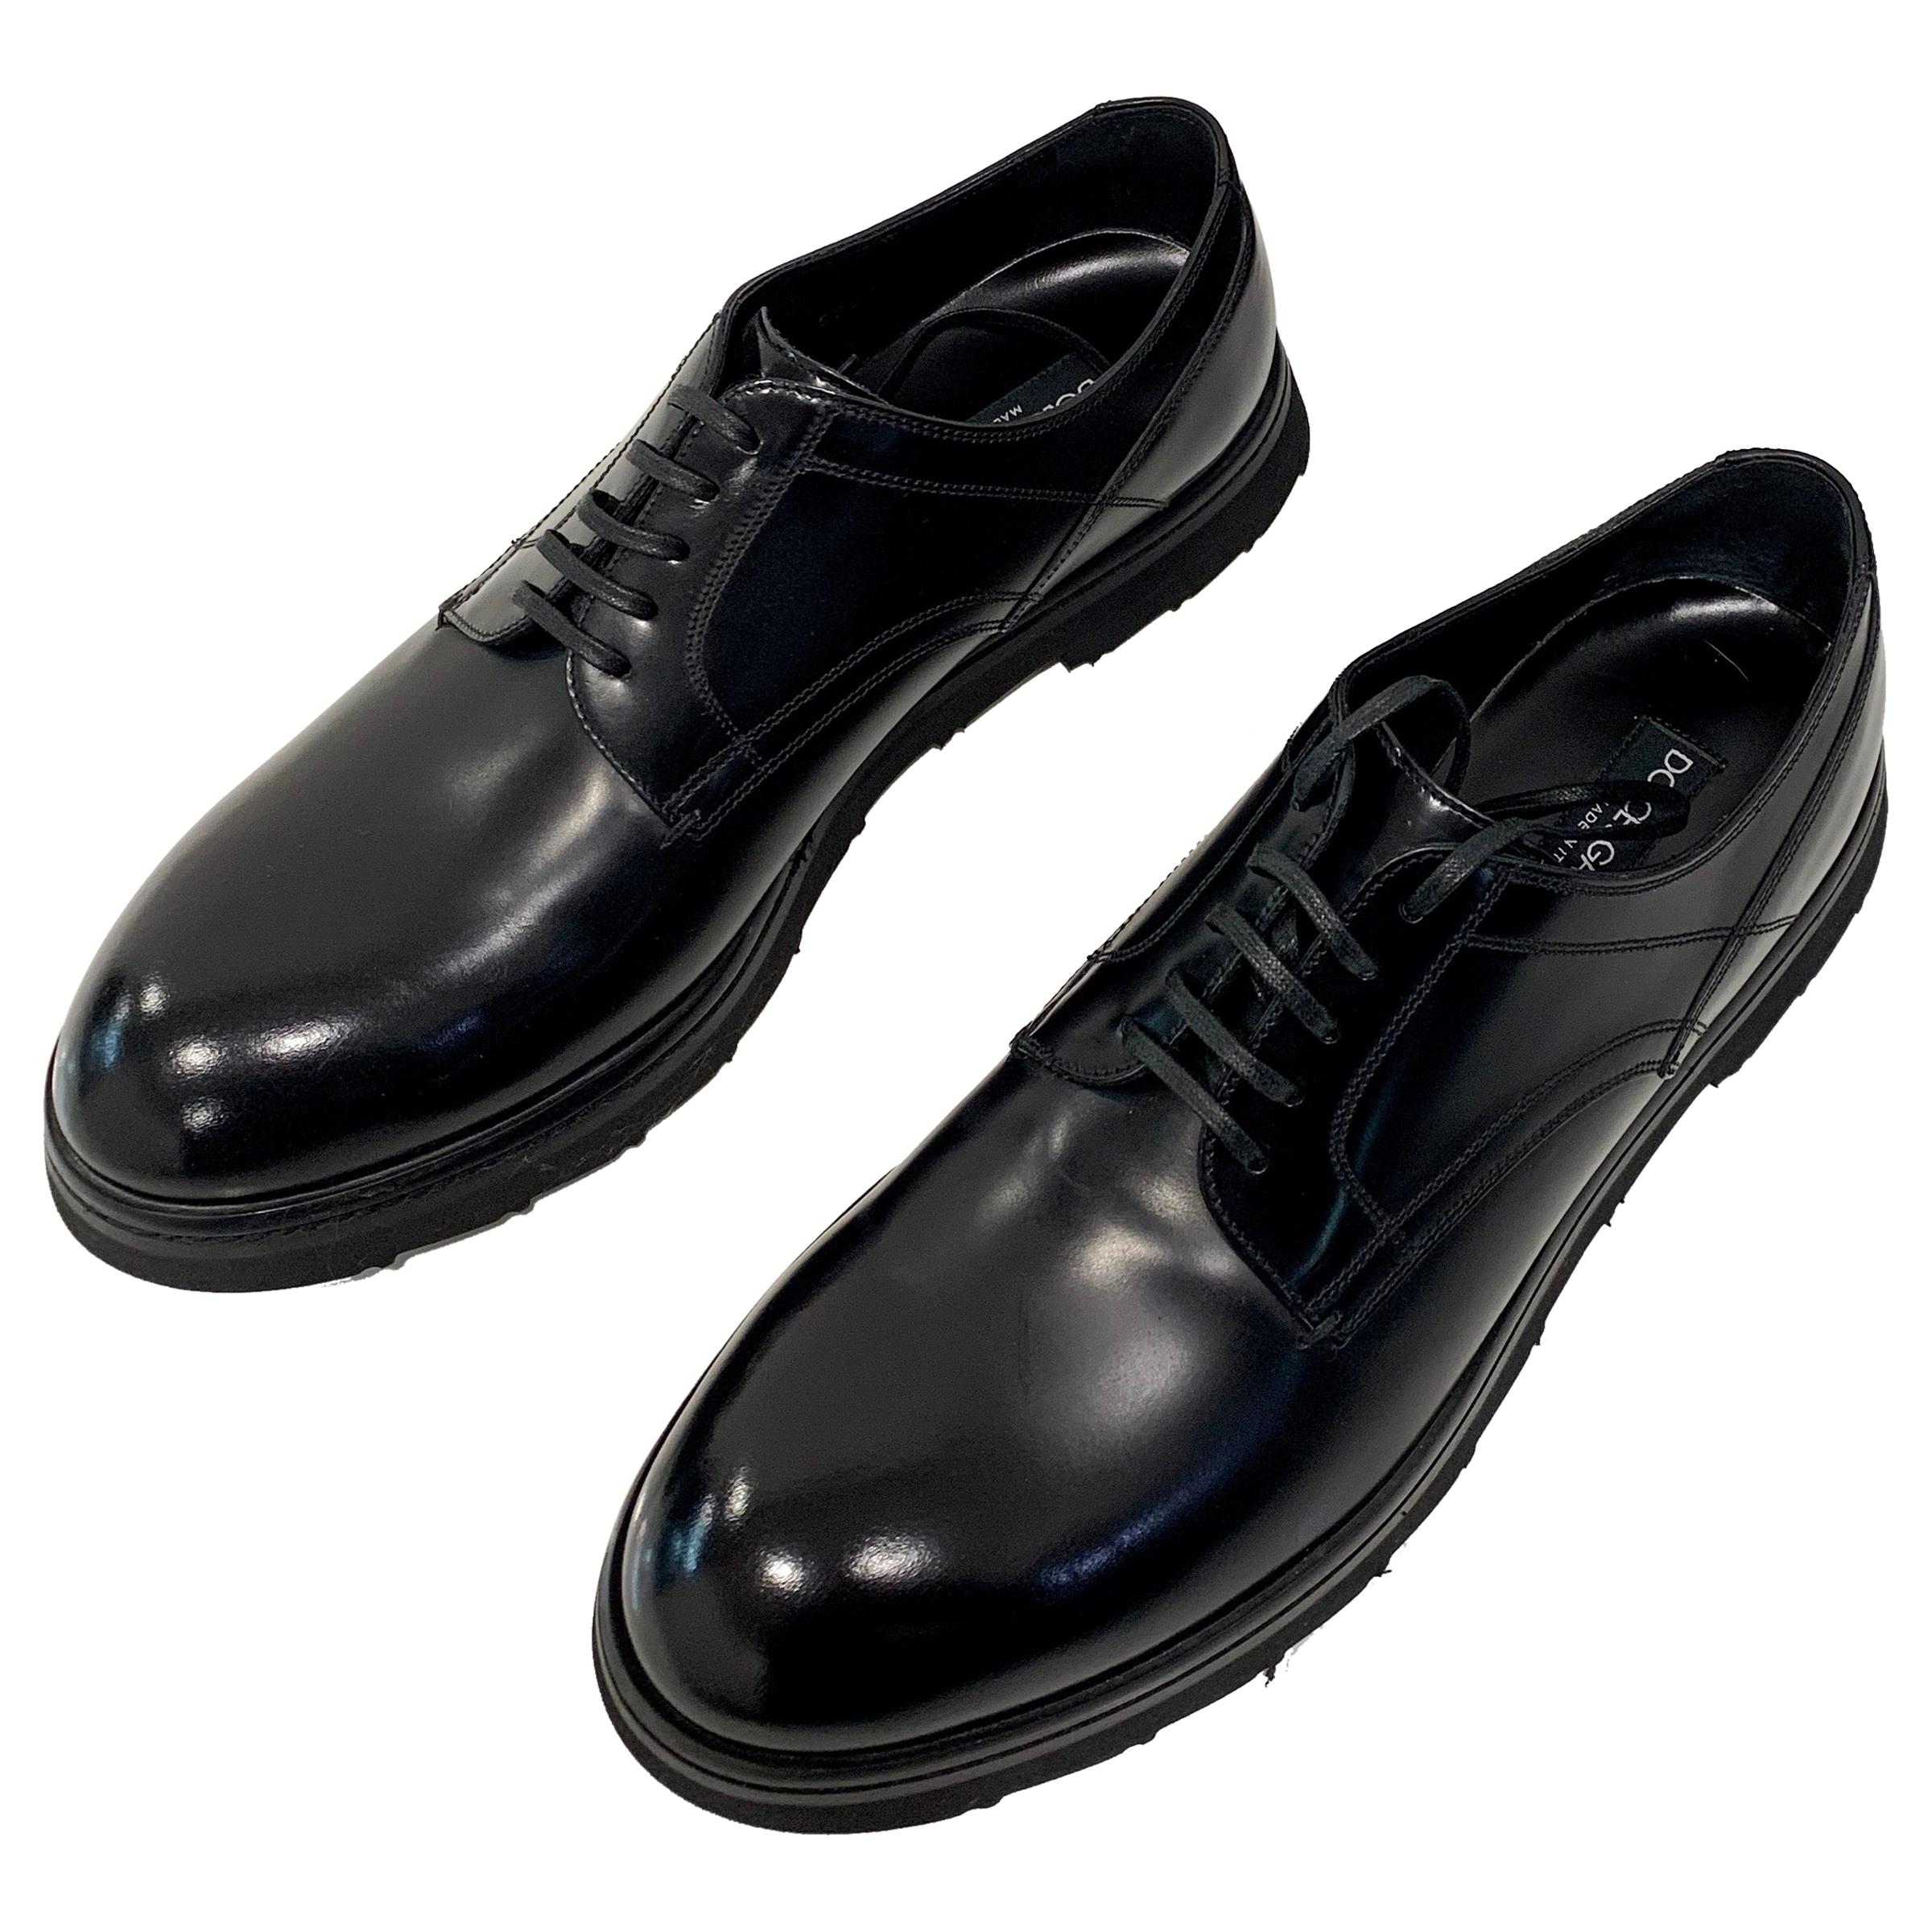 2014 Dolce and Gabbana Men’s Black Leather Shoes